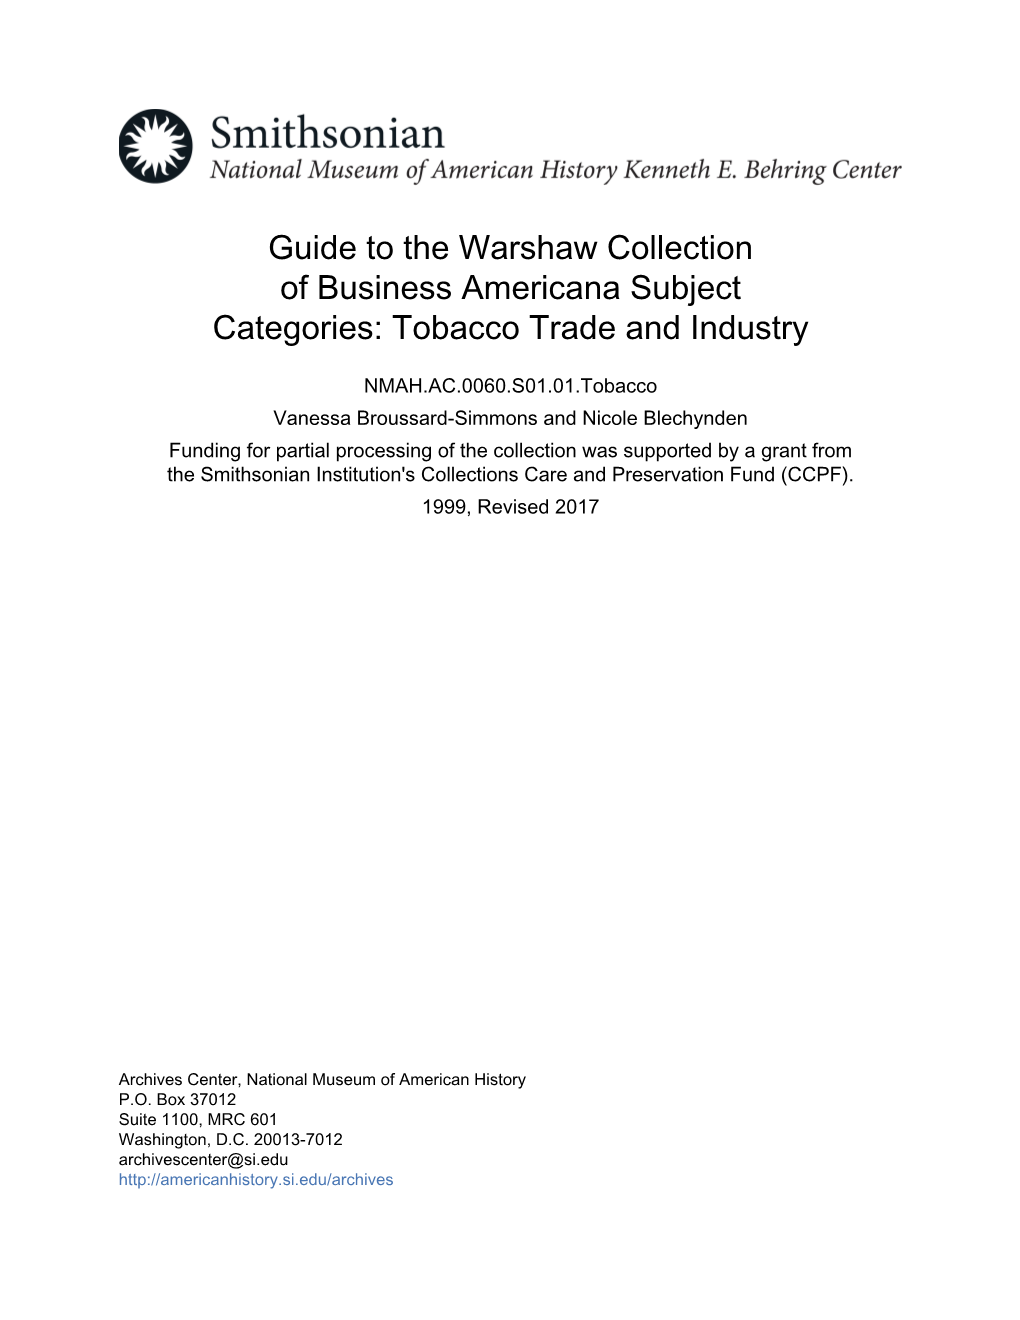 Tobacco Trade and Industry